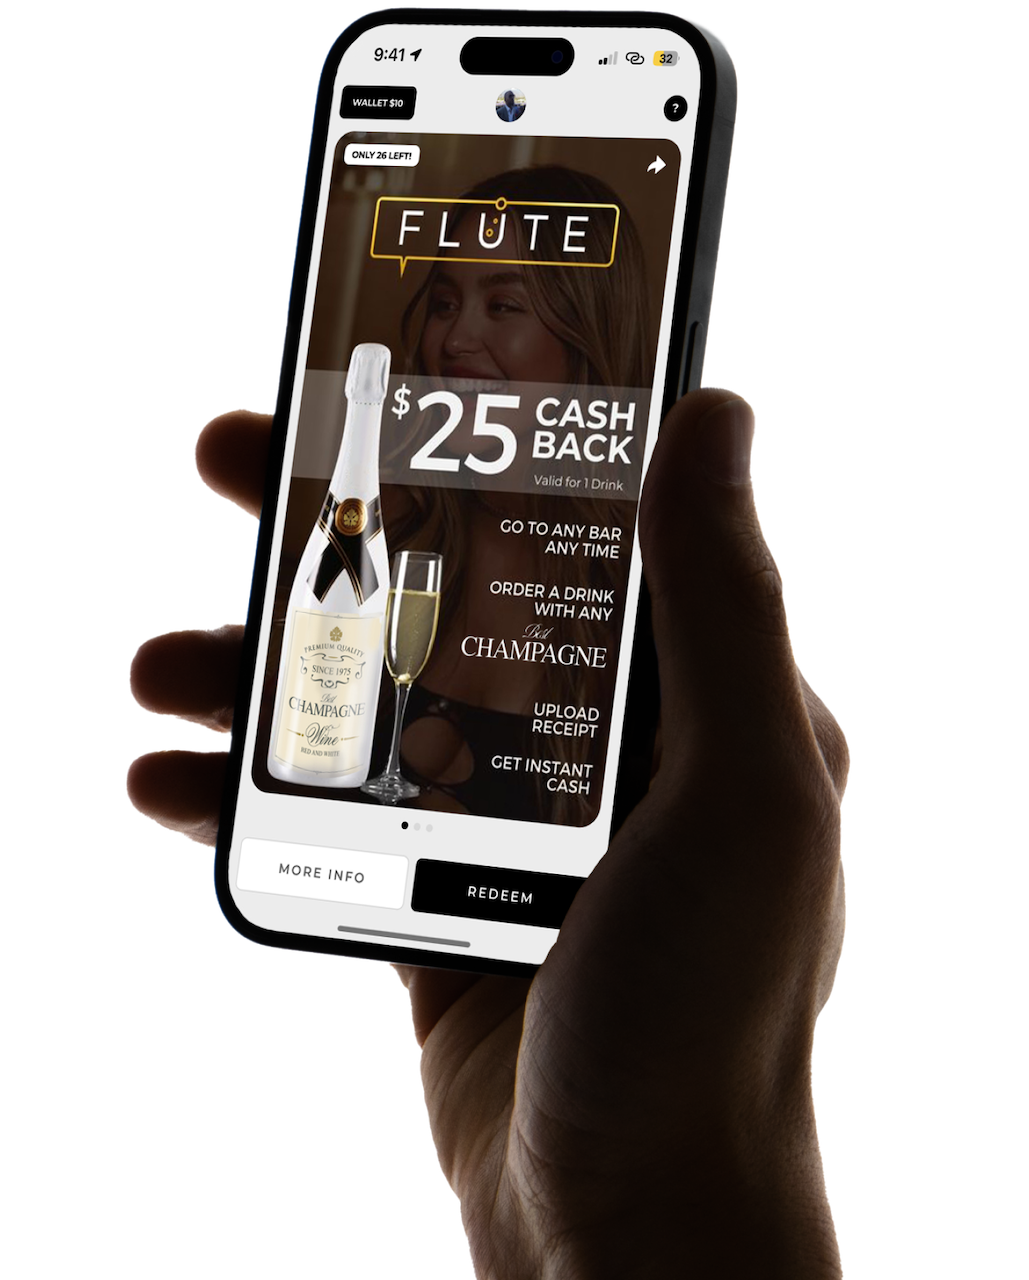 Hand holding a smartphone displaying an app offering $25 cashback for ordering champagne. The screen shows a champagne bottle, glass, and redemption options.